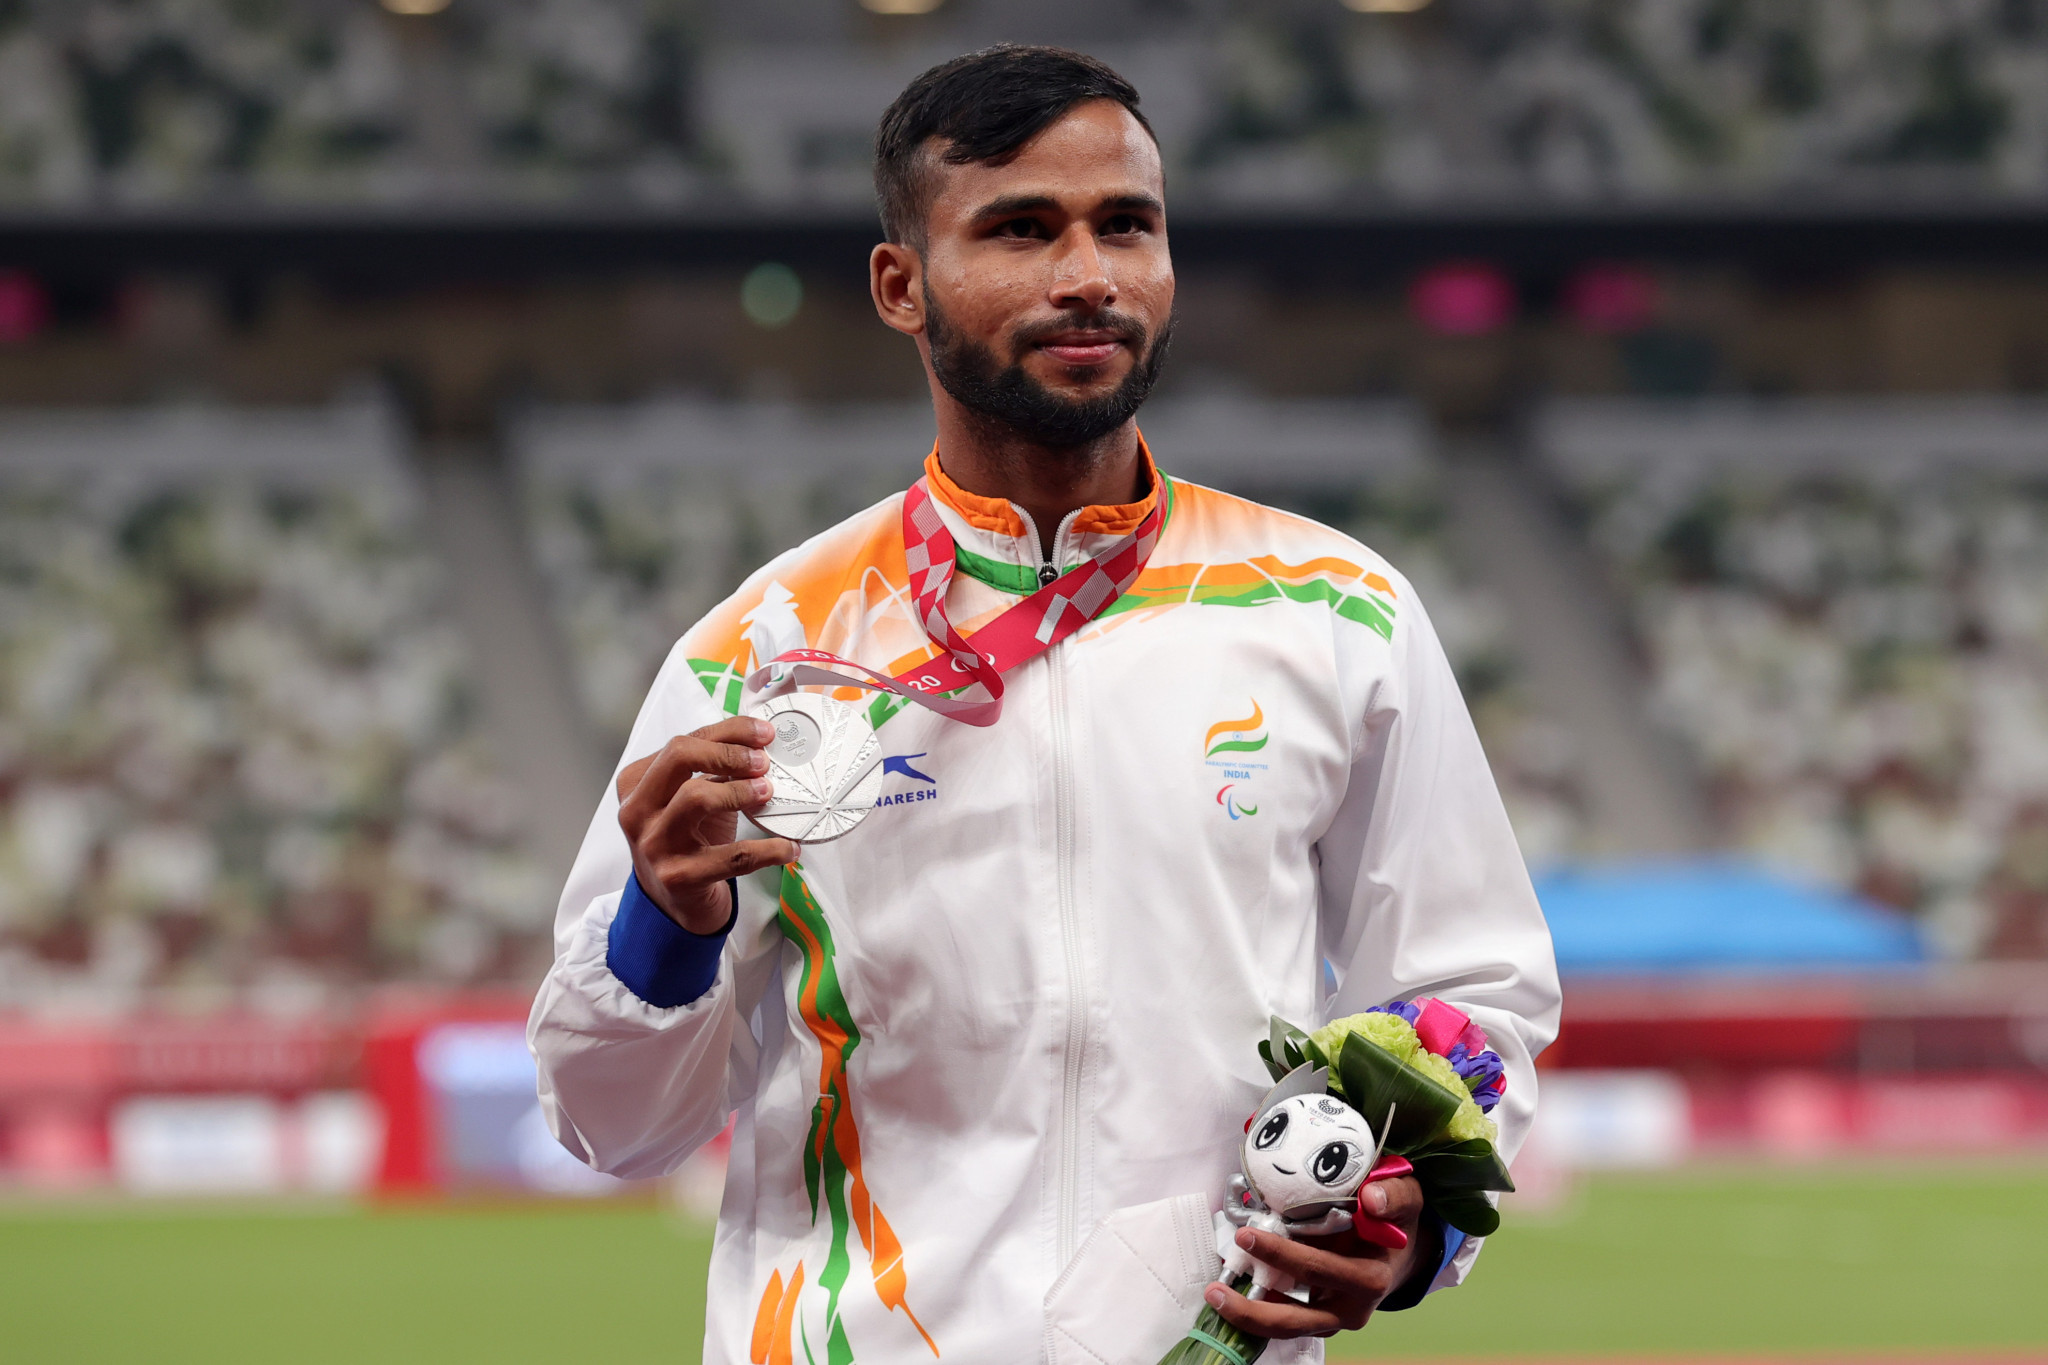 Praveen Kumar of India bagged a silver in the T64 high jump event at the Tokyo 2020 Paralympic Games ©Getty Images